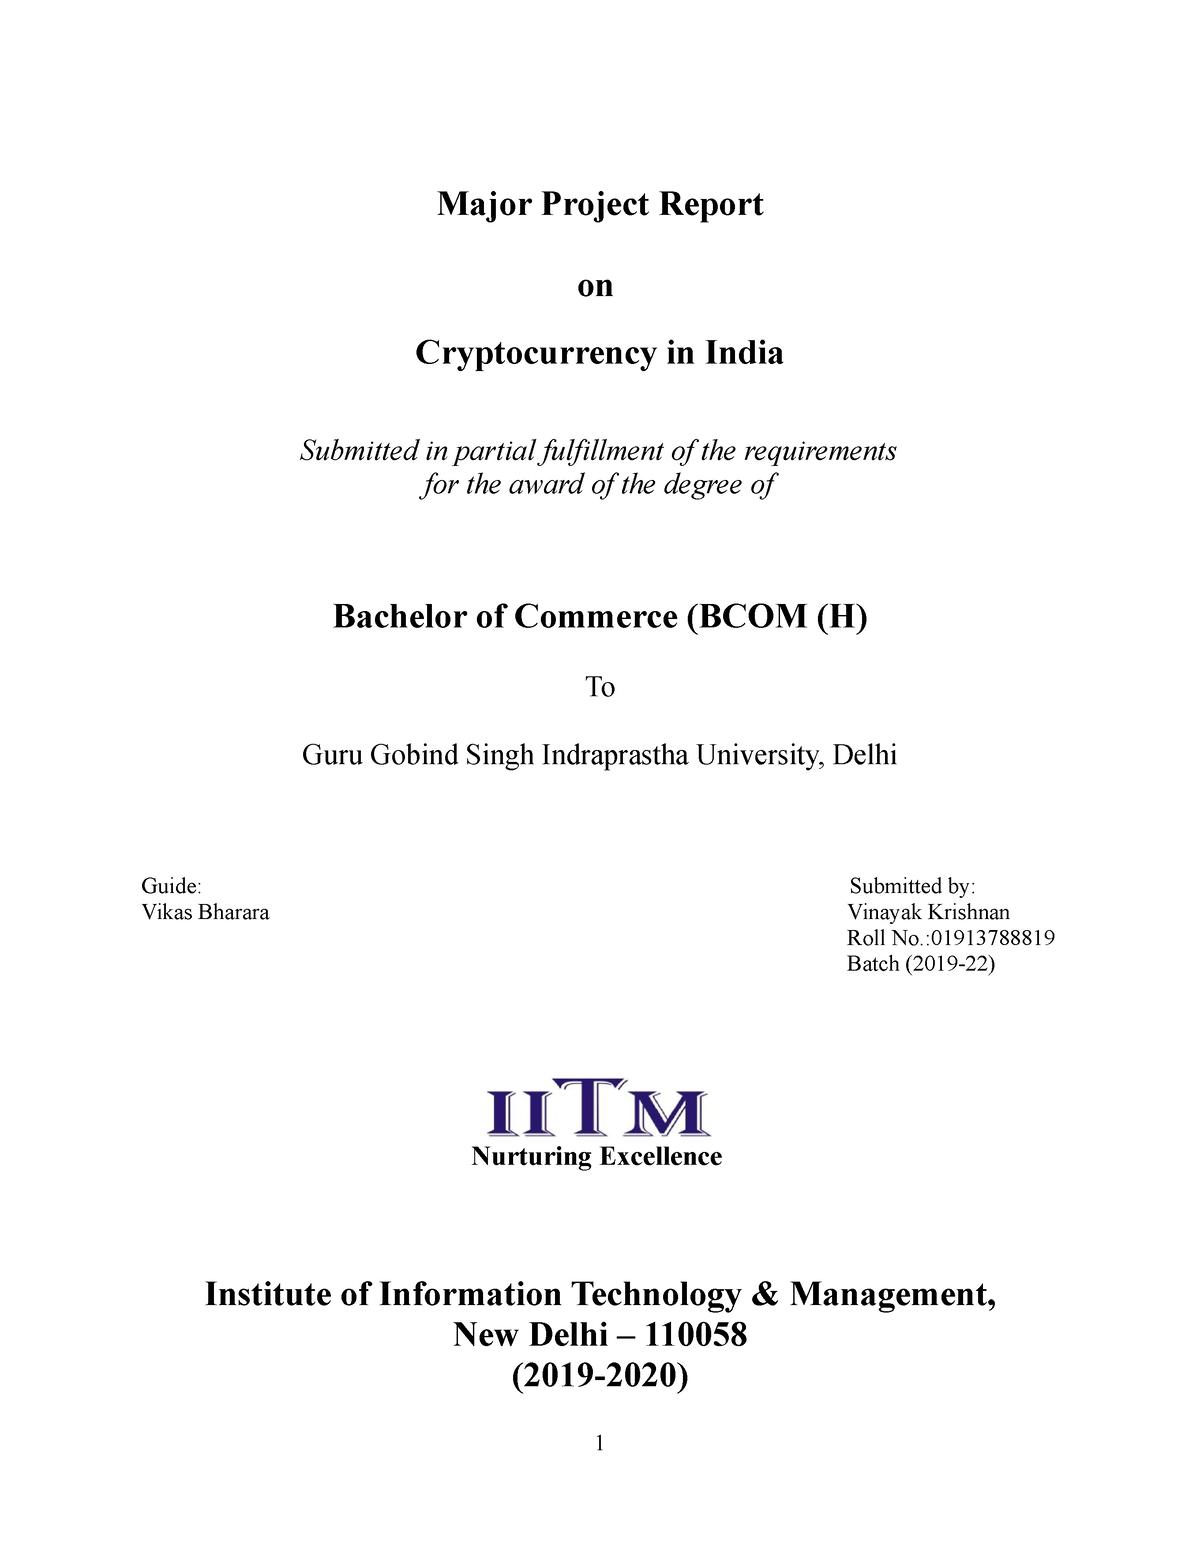 dissertation on cryptocurrency in india